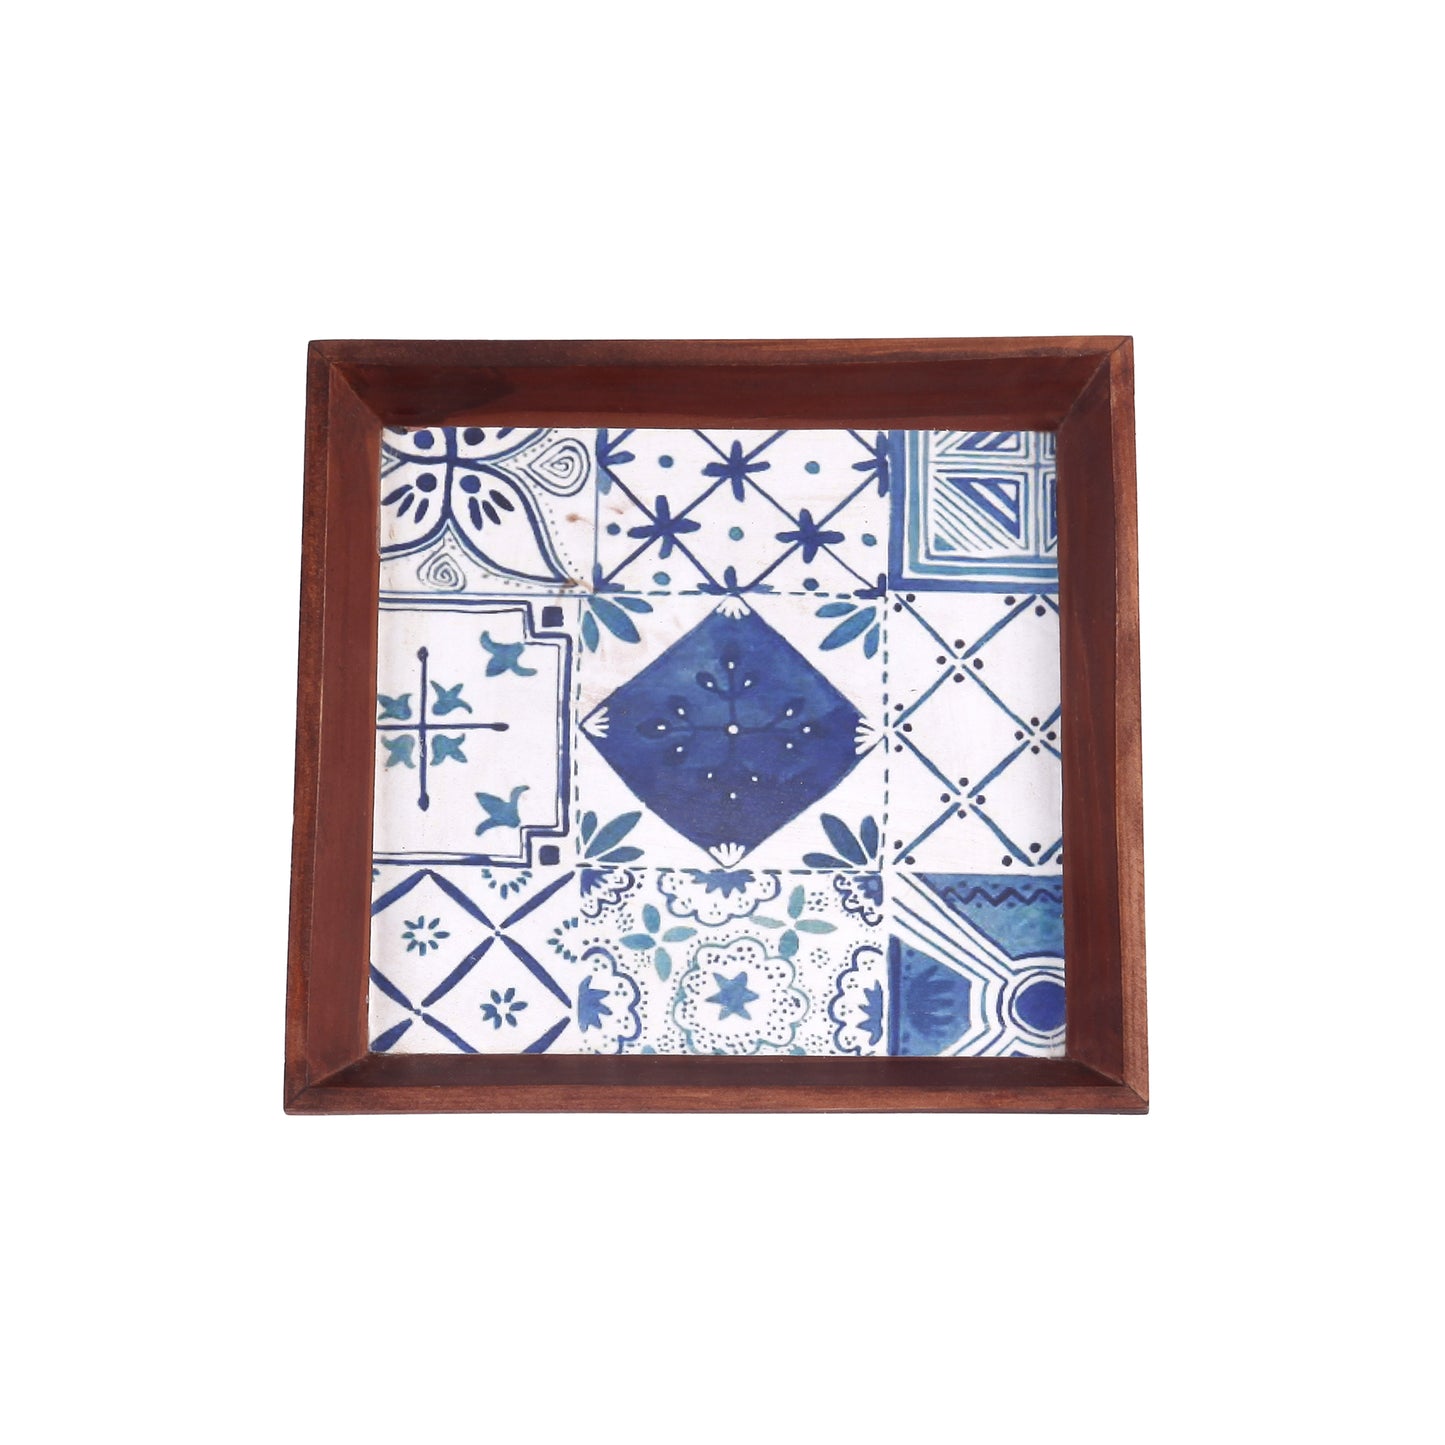 A Tiny Mistake Turkish Blue Tiles Small Square Wooden Serving Tray, 18 x 18 x 2 cm